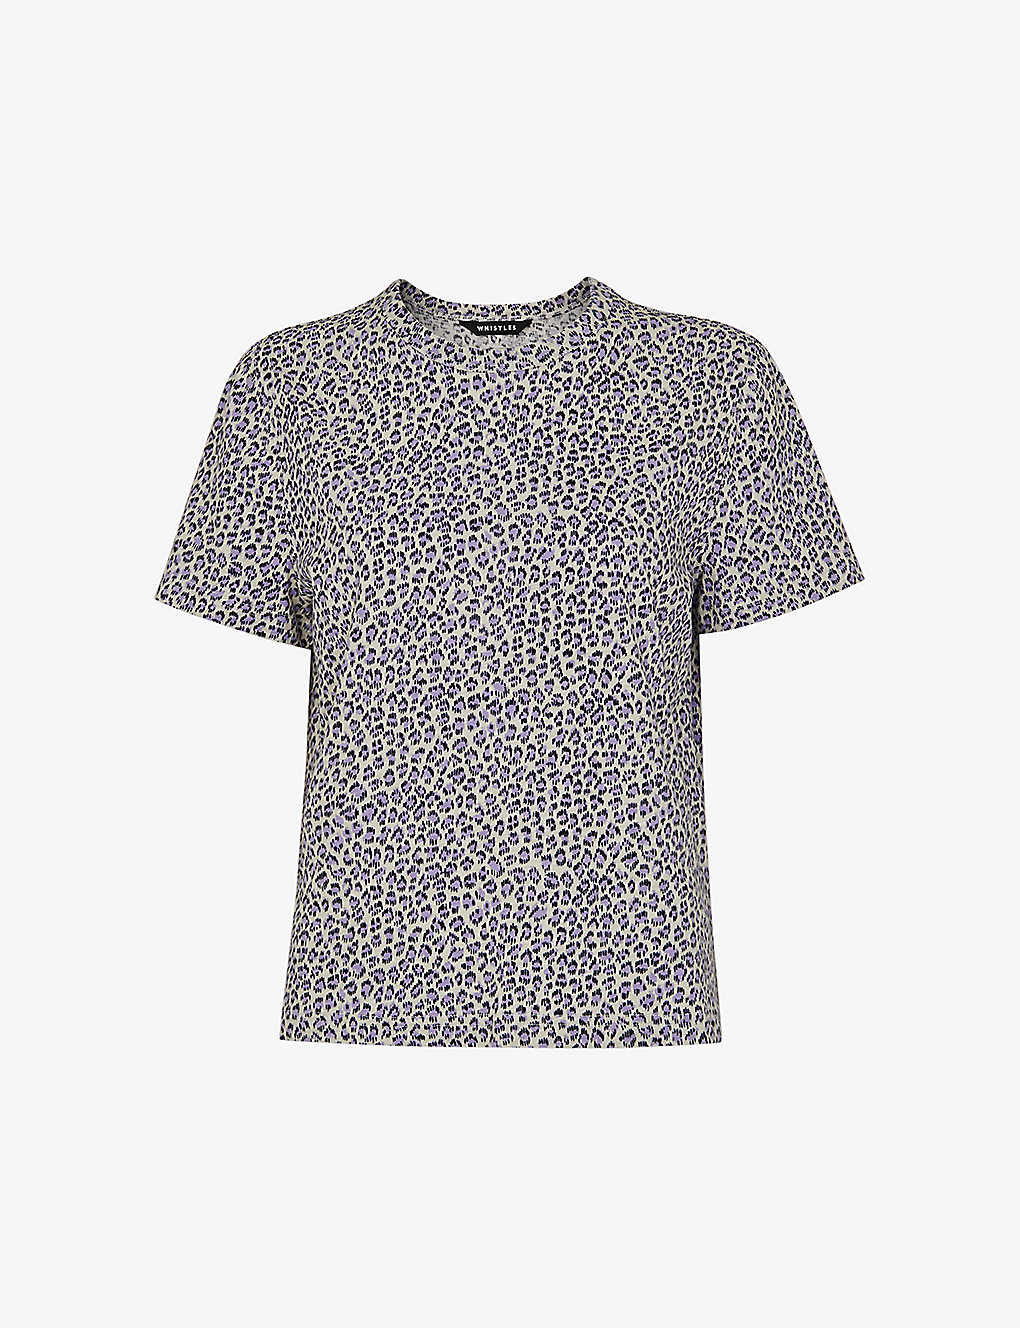 Whistles Cotton Dashed Leopard Print Tee In Beige/black